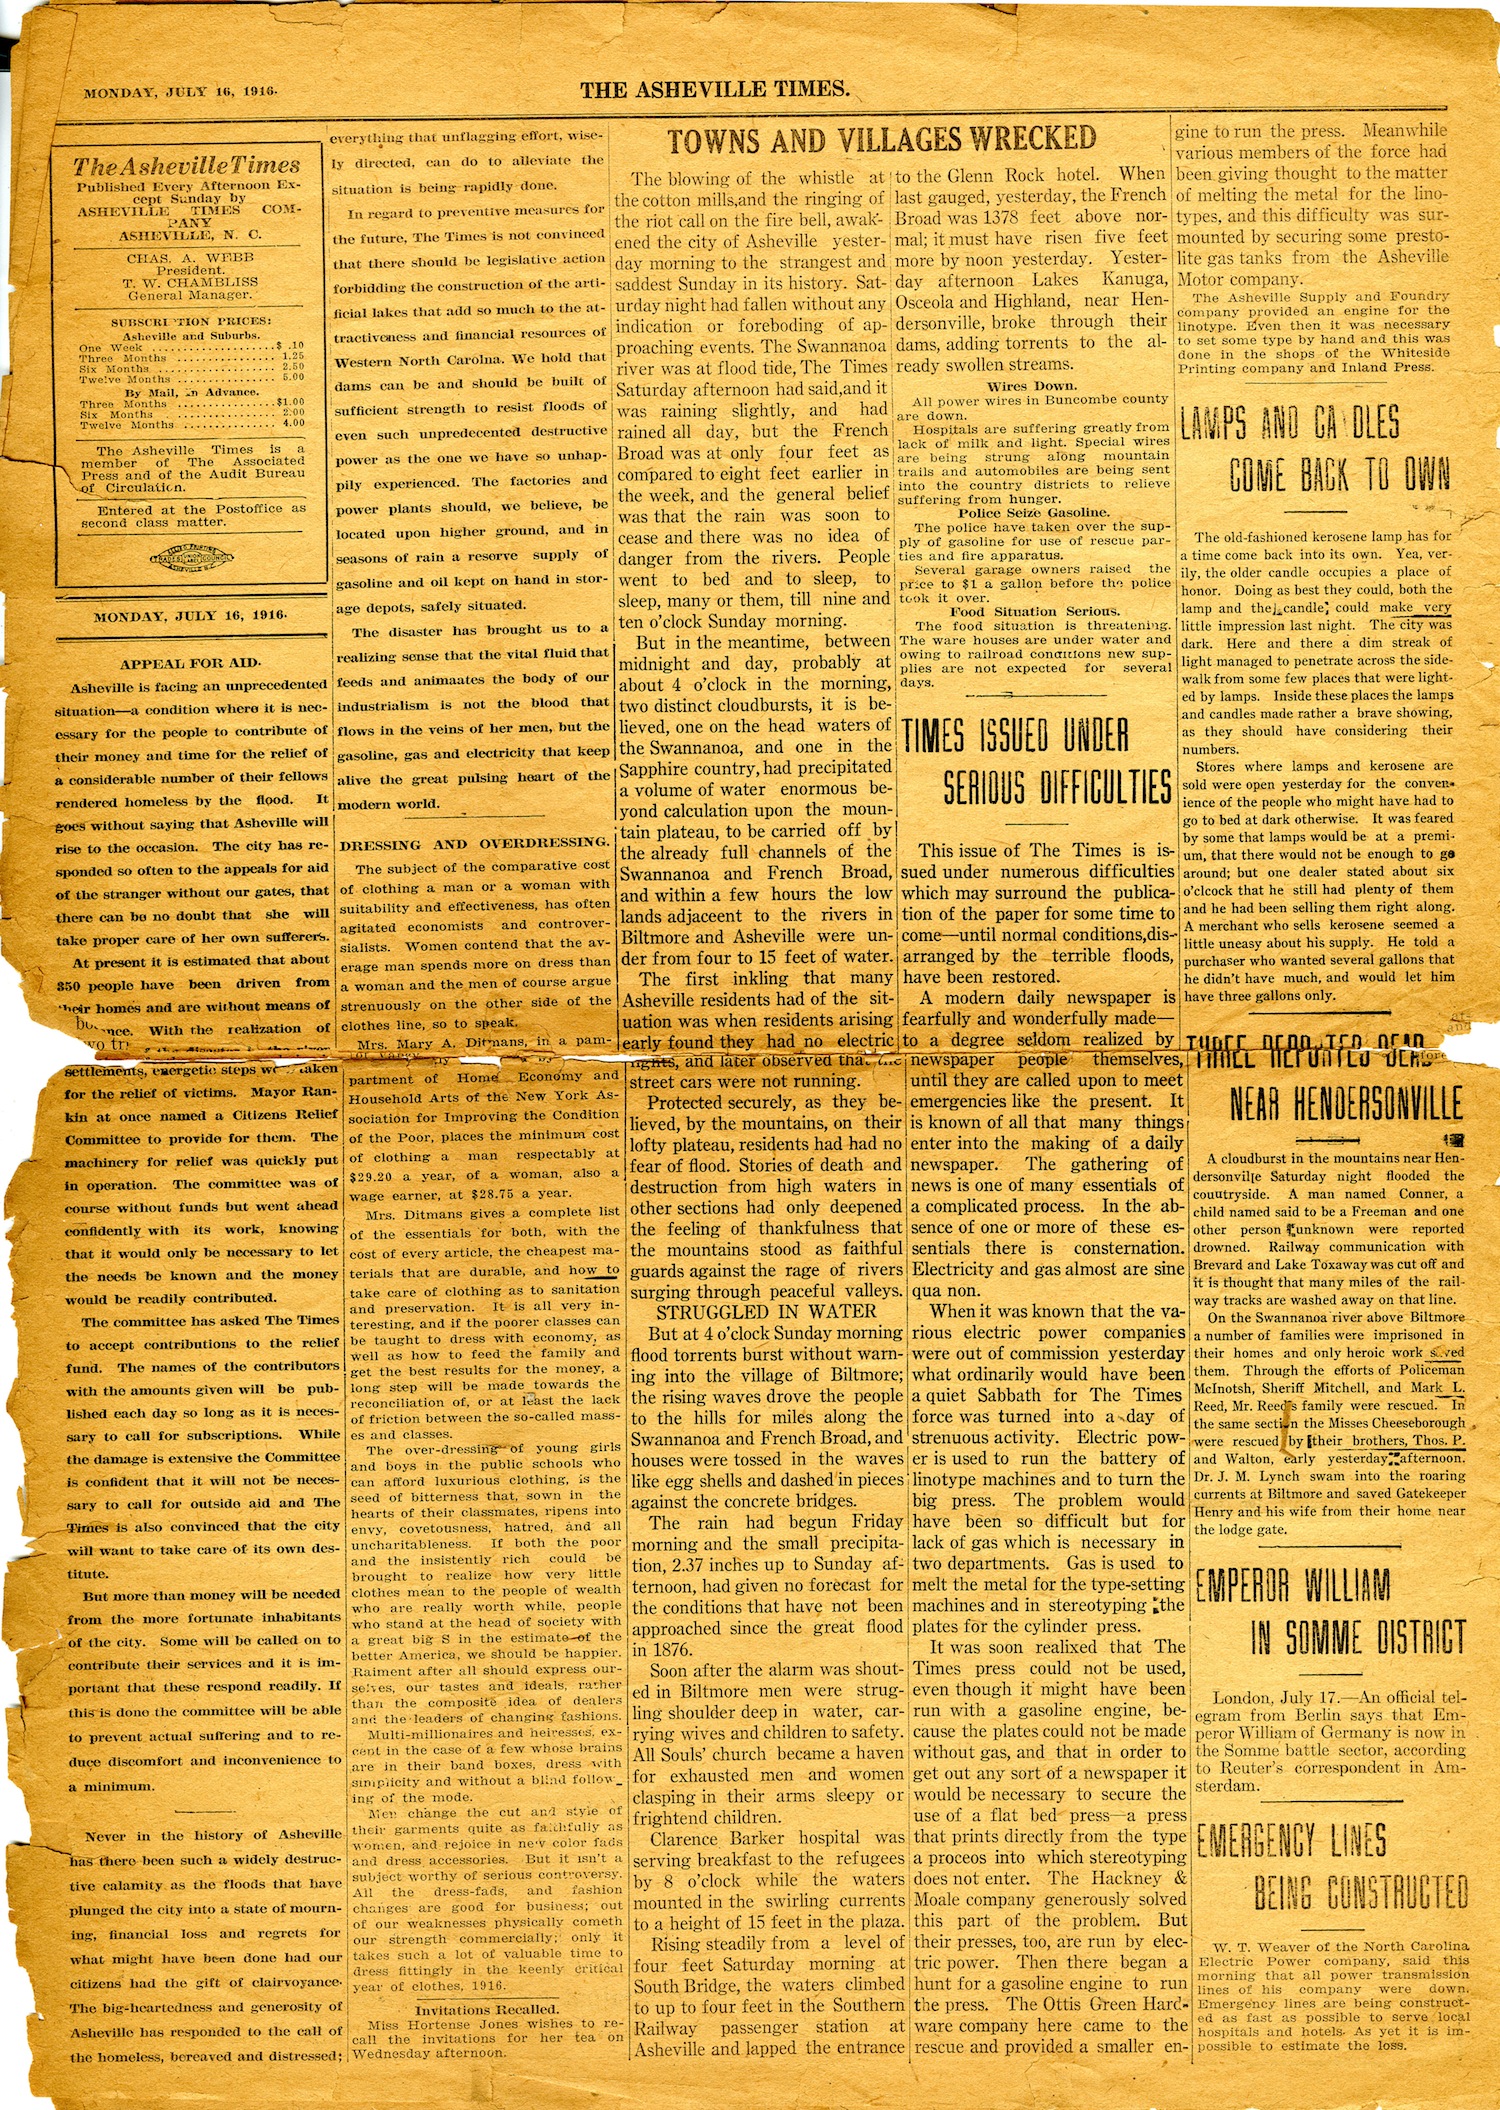 Asheville Times July 16, 1916 page 2